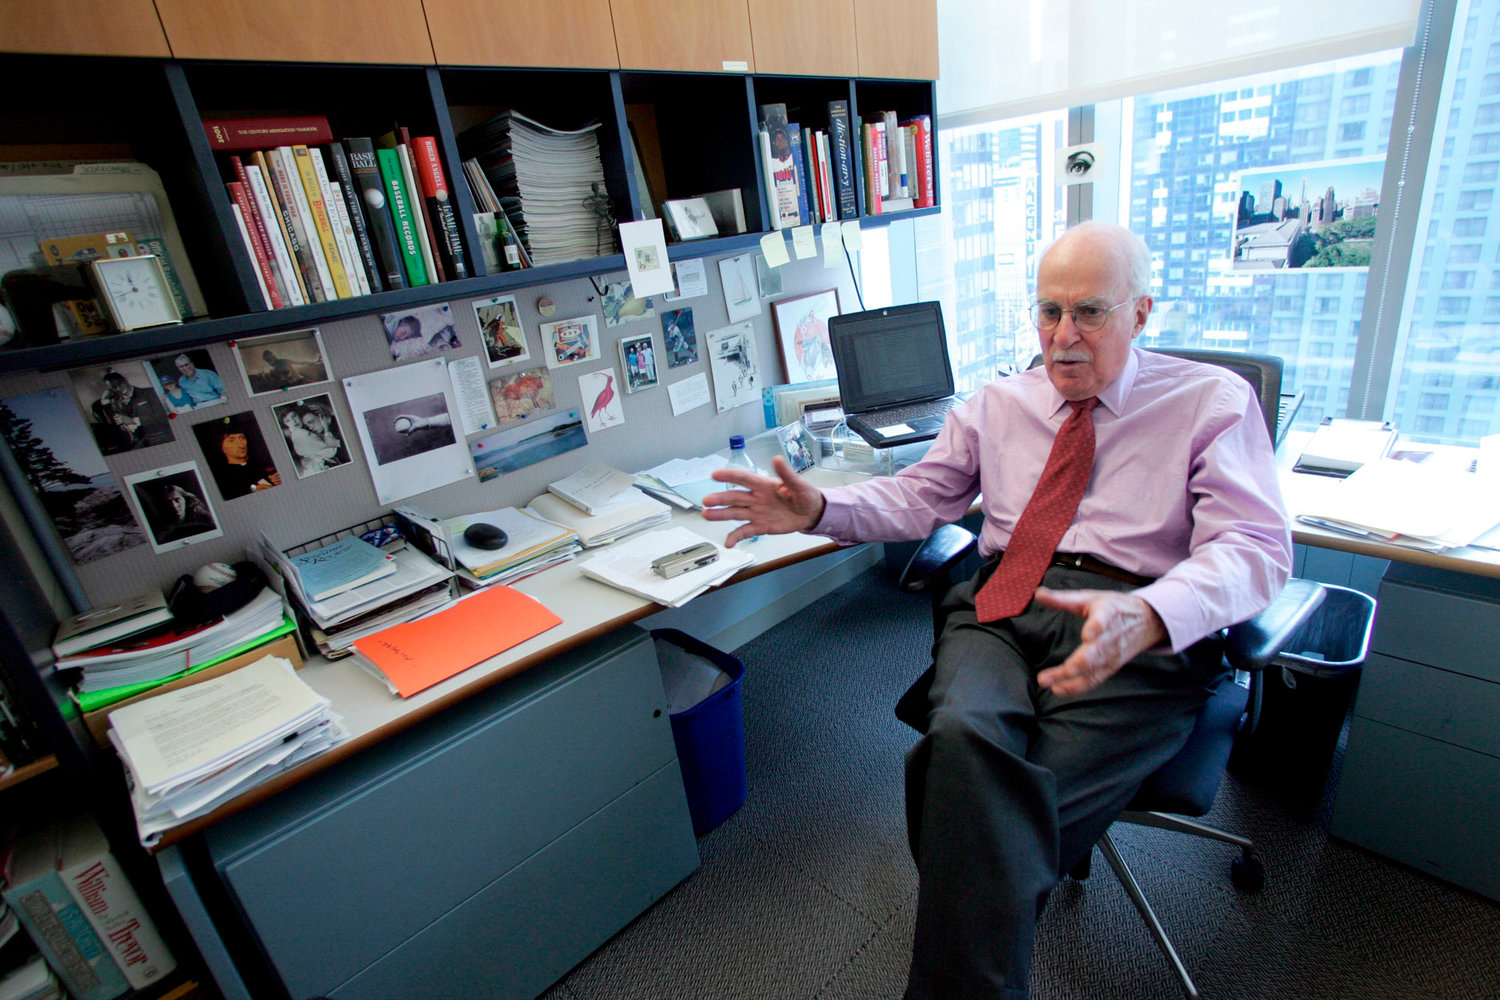 Author Roger Angell gestures during an interview at his office at the New Yorker magazine on April 4, 2006, in New York. Angell, a longtime New Yorker writer and editor, has died the New Yorker announced Friday, May 20, 2022. He was 101. Angell, the son of founding New Yorker editor Katharine White and stepson of E.B. White, contributed hundreds of essays and stories to the magazine over a 70-year career. (AP Photo/Mary Altaffer, File)